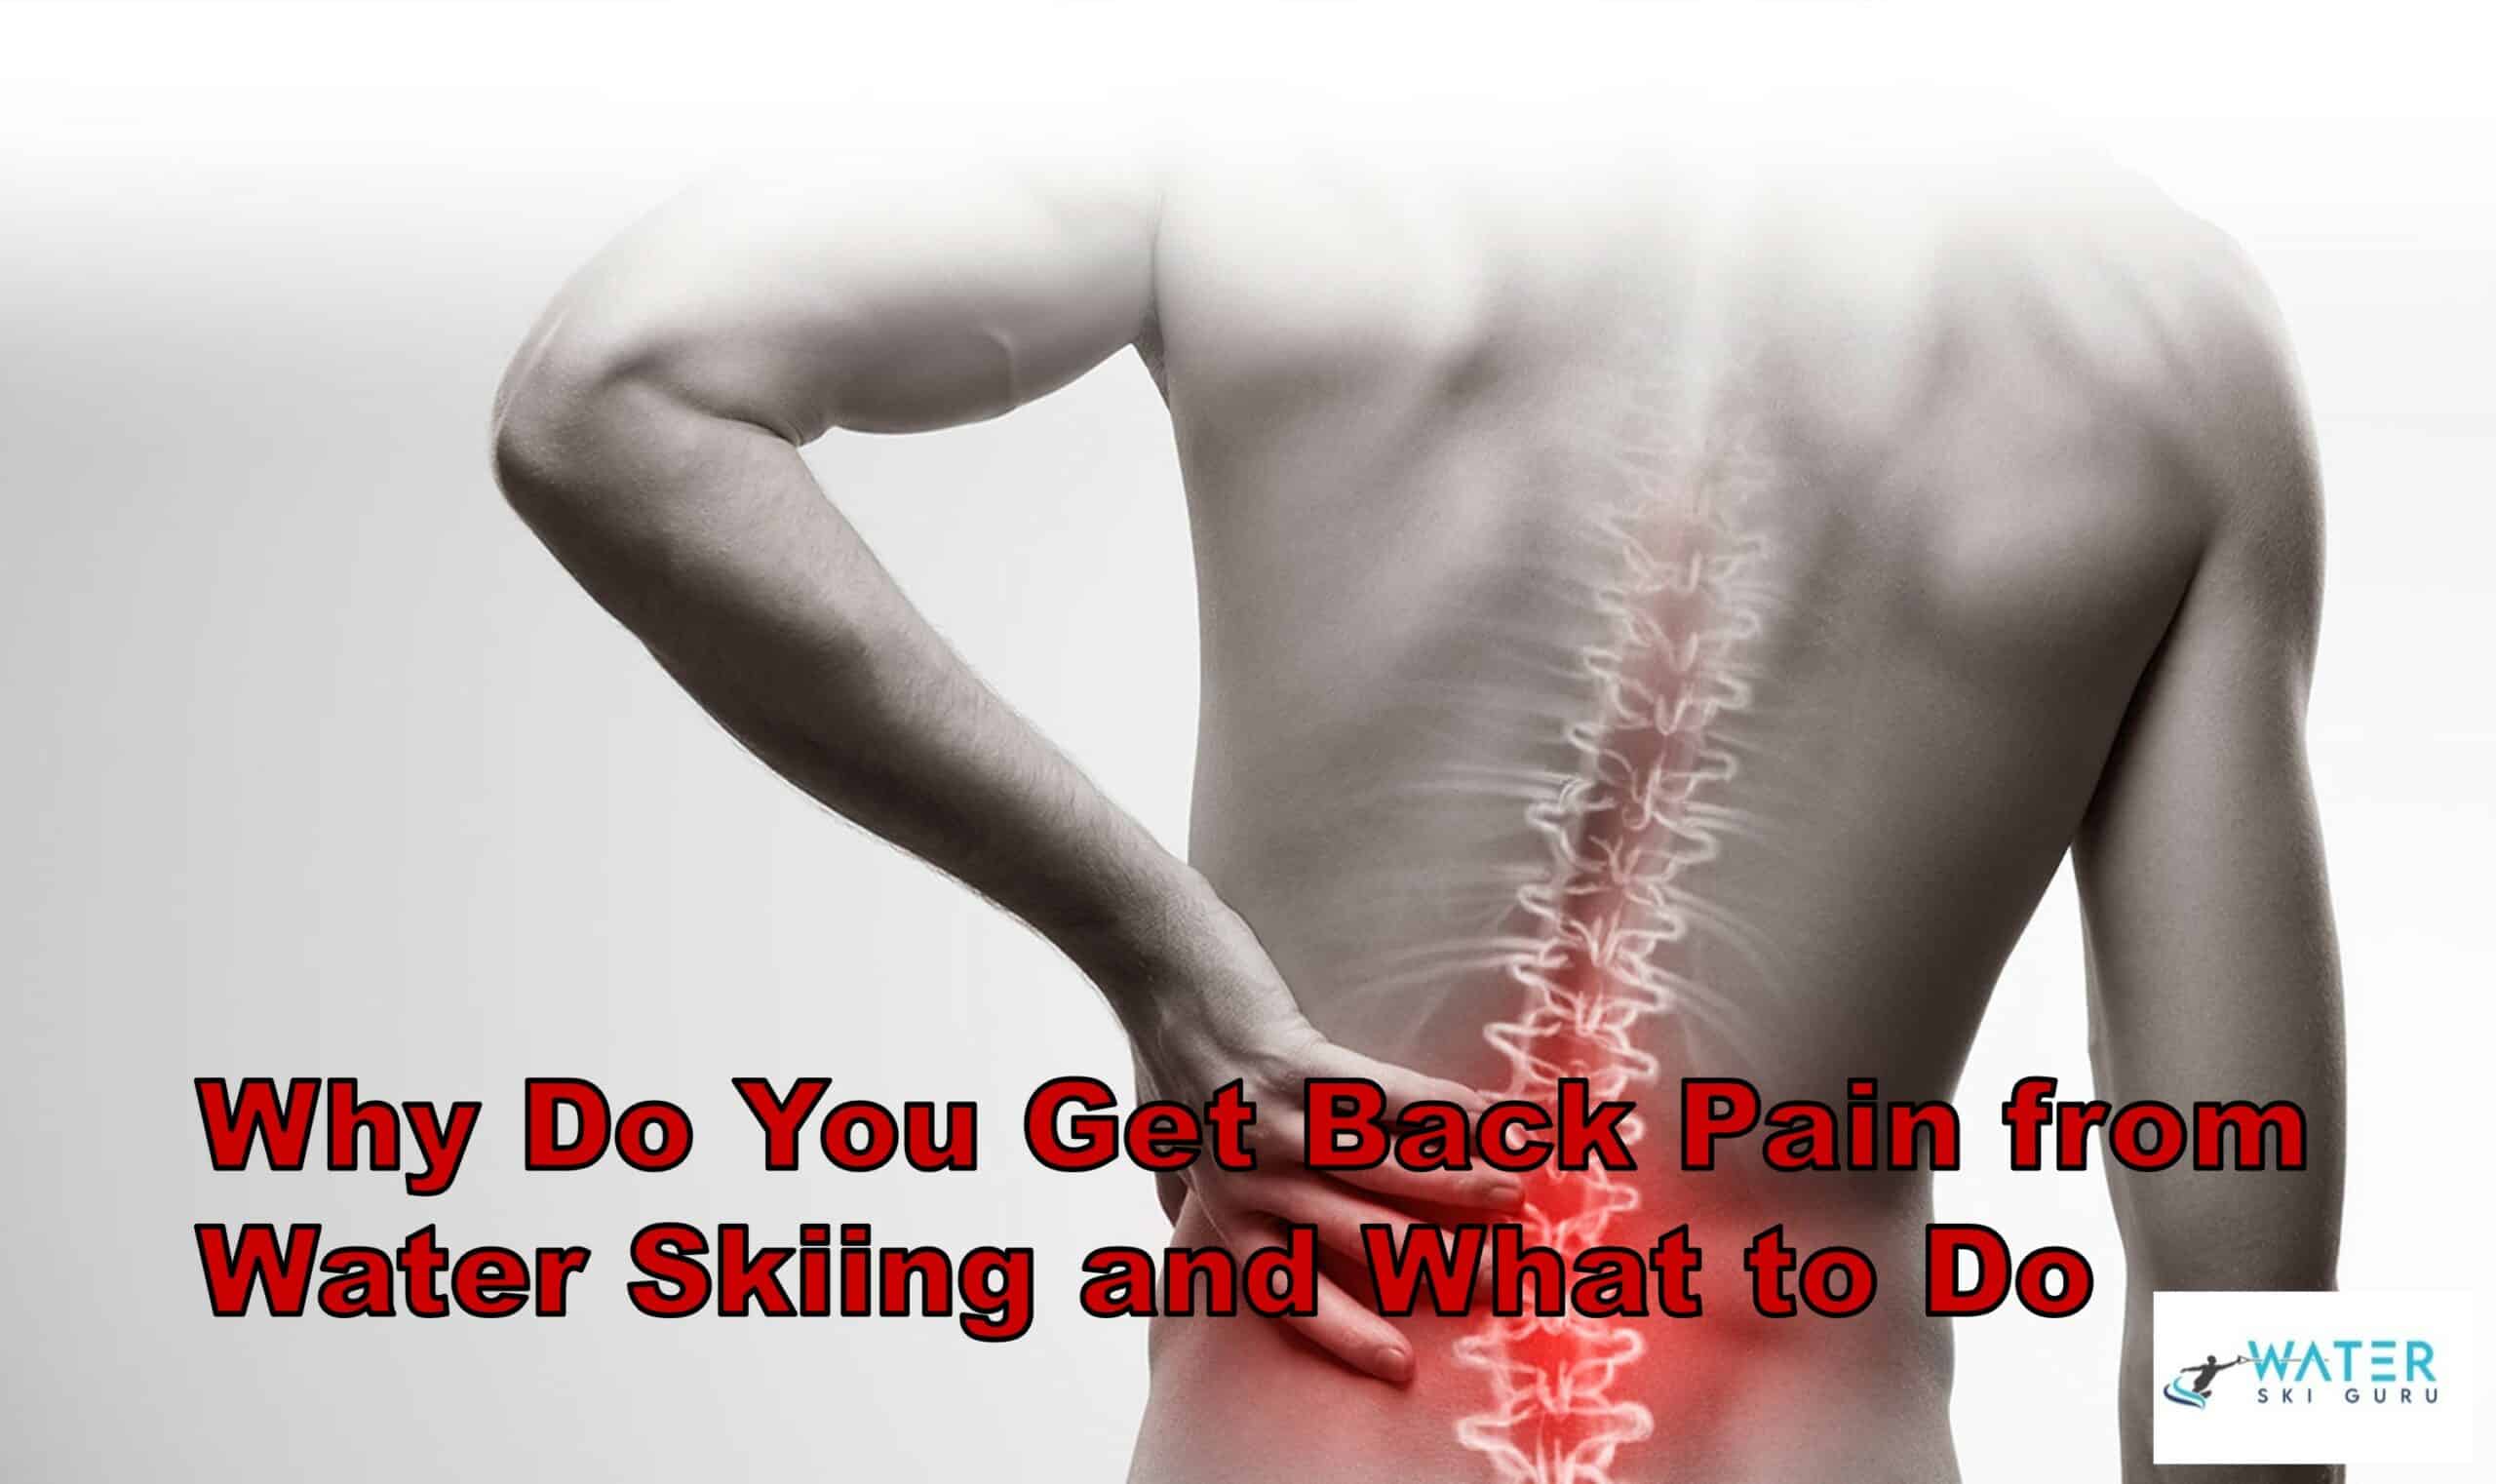 Why Do You Get Back Pain from Water Skiing and What to Do